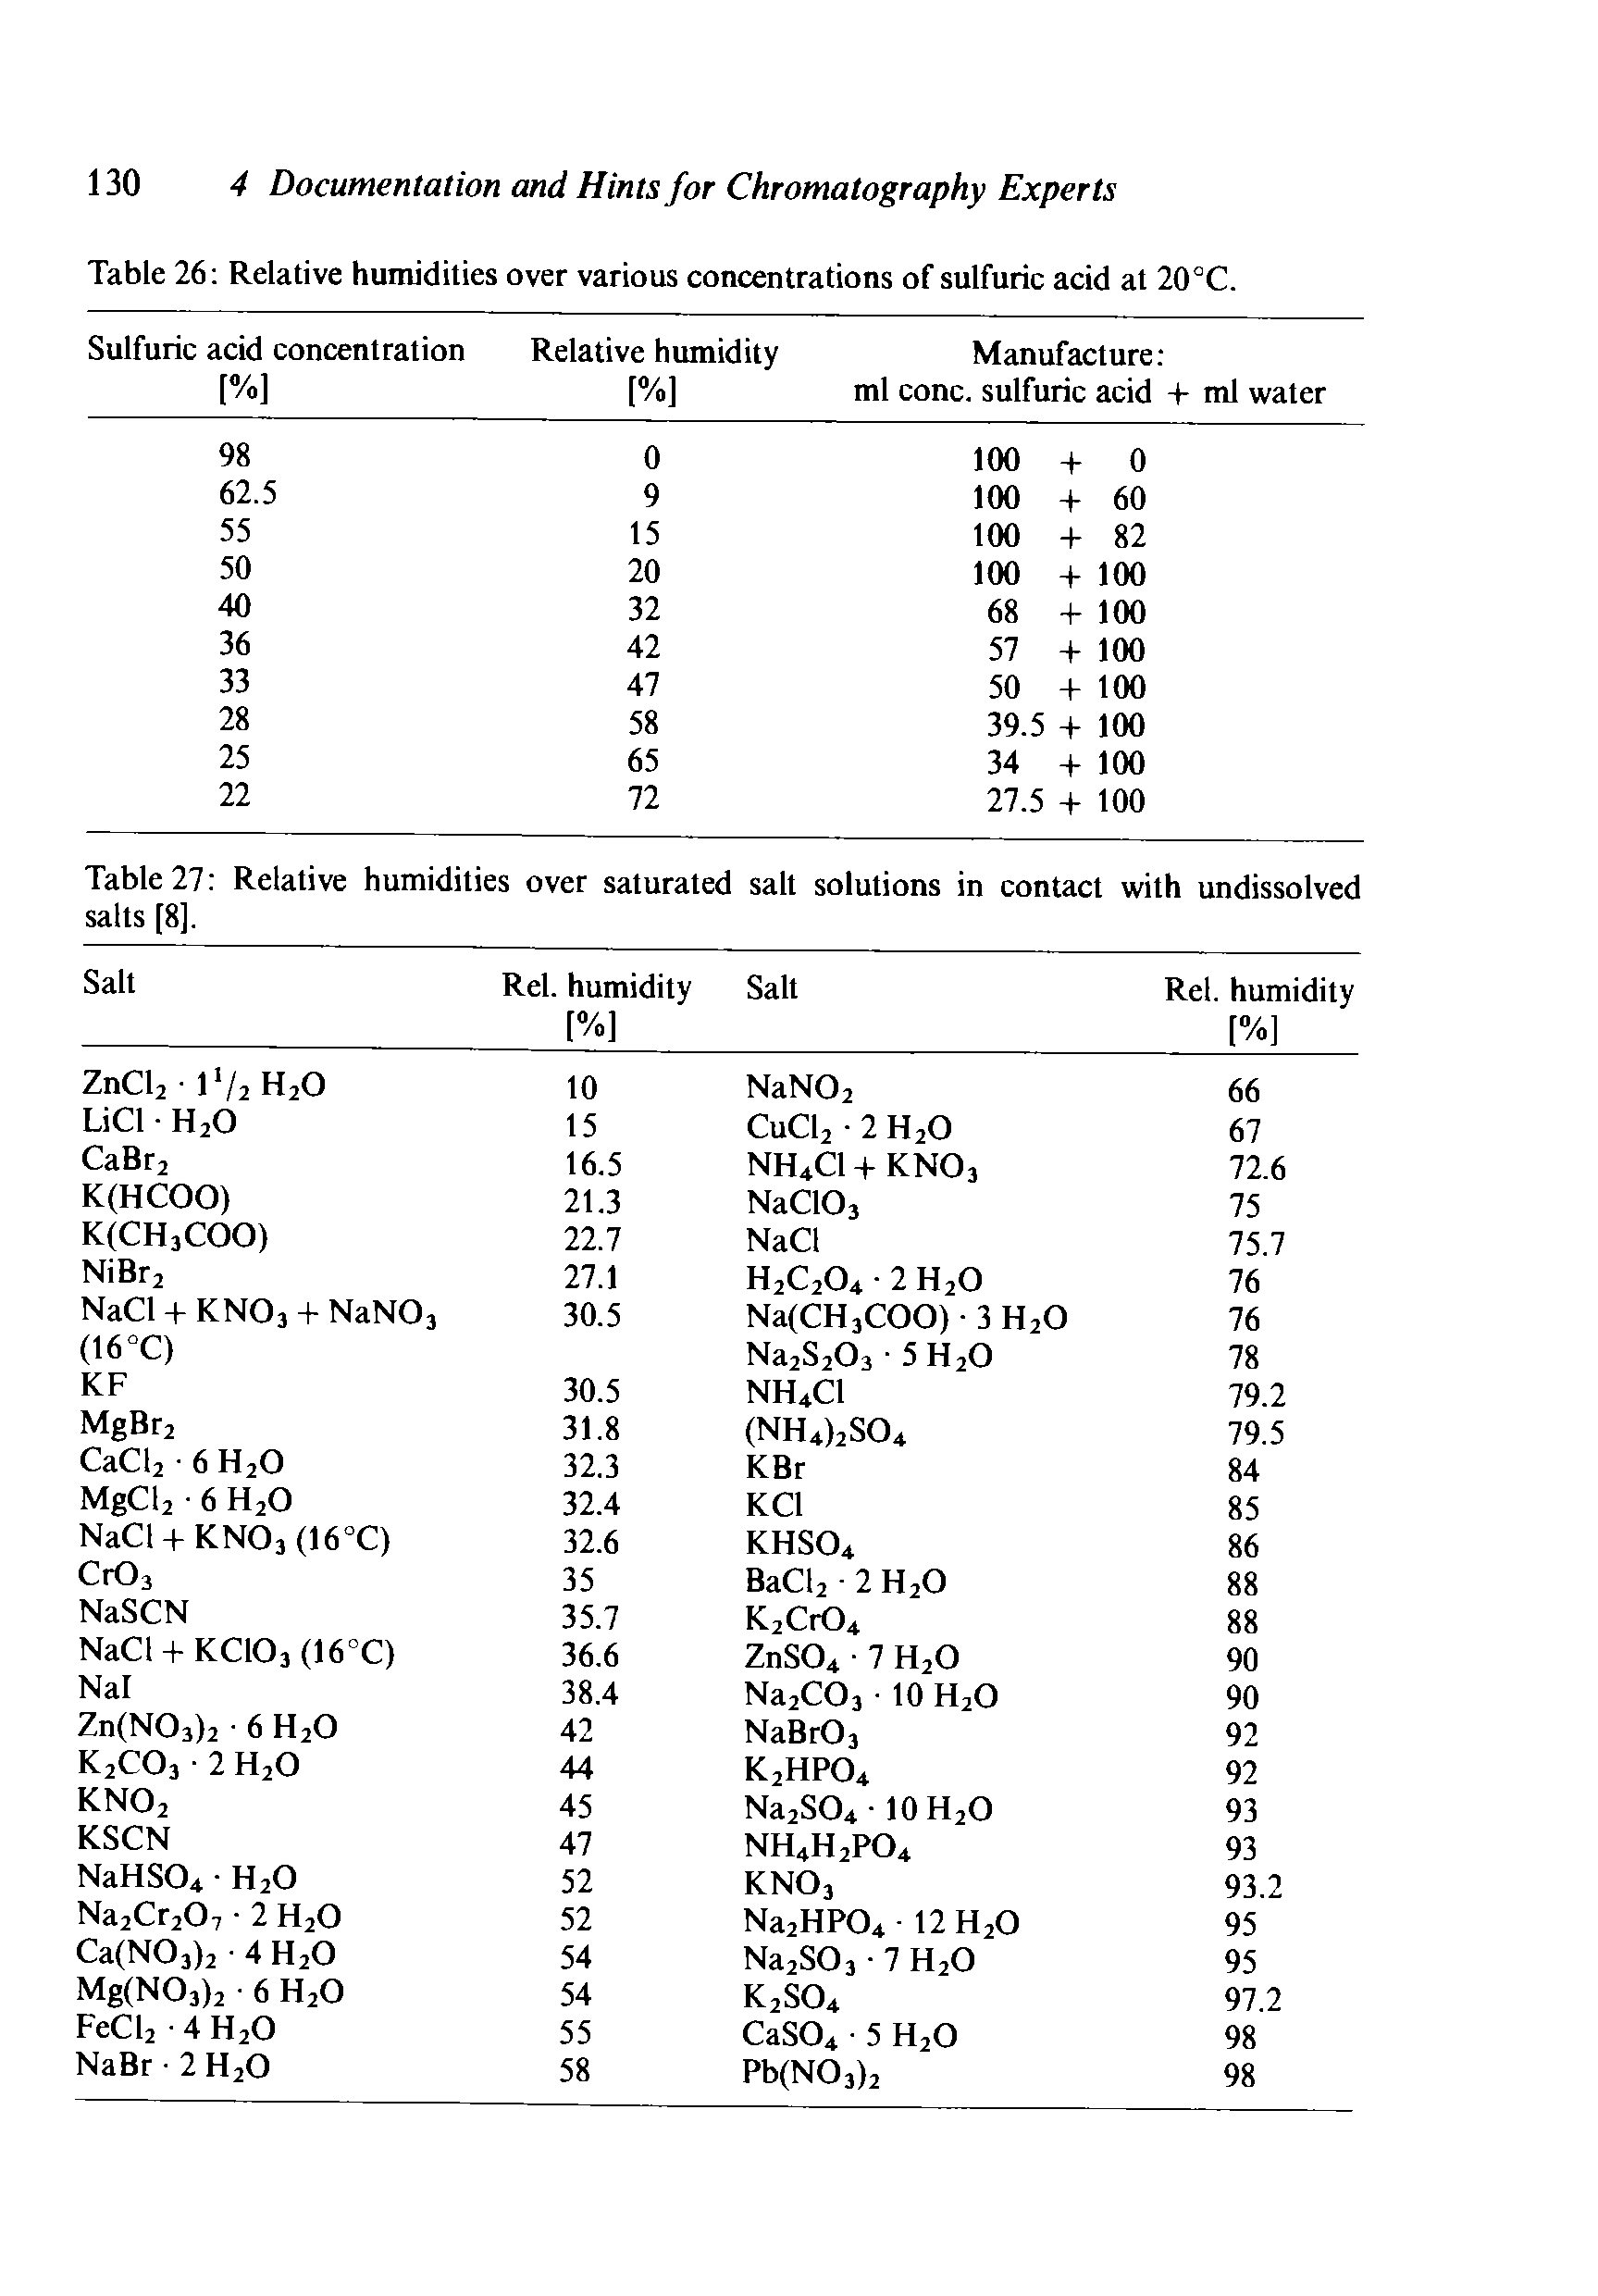 Table 27 Relative humidities over saturated salts [8], salt solutions in contact with undissolved ...